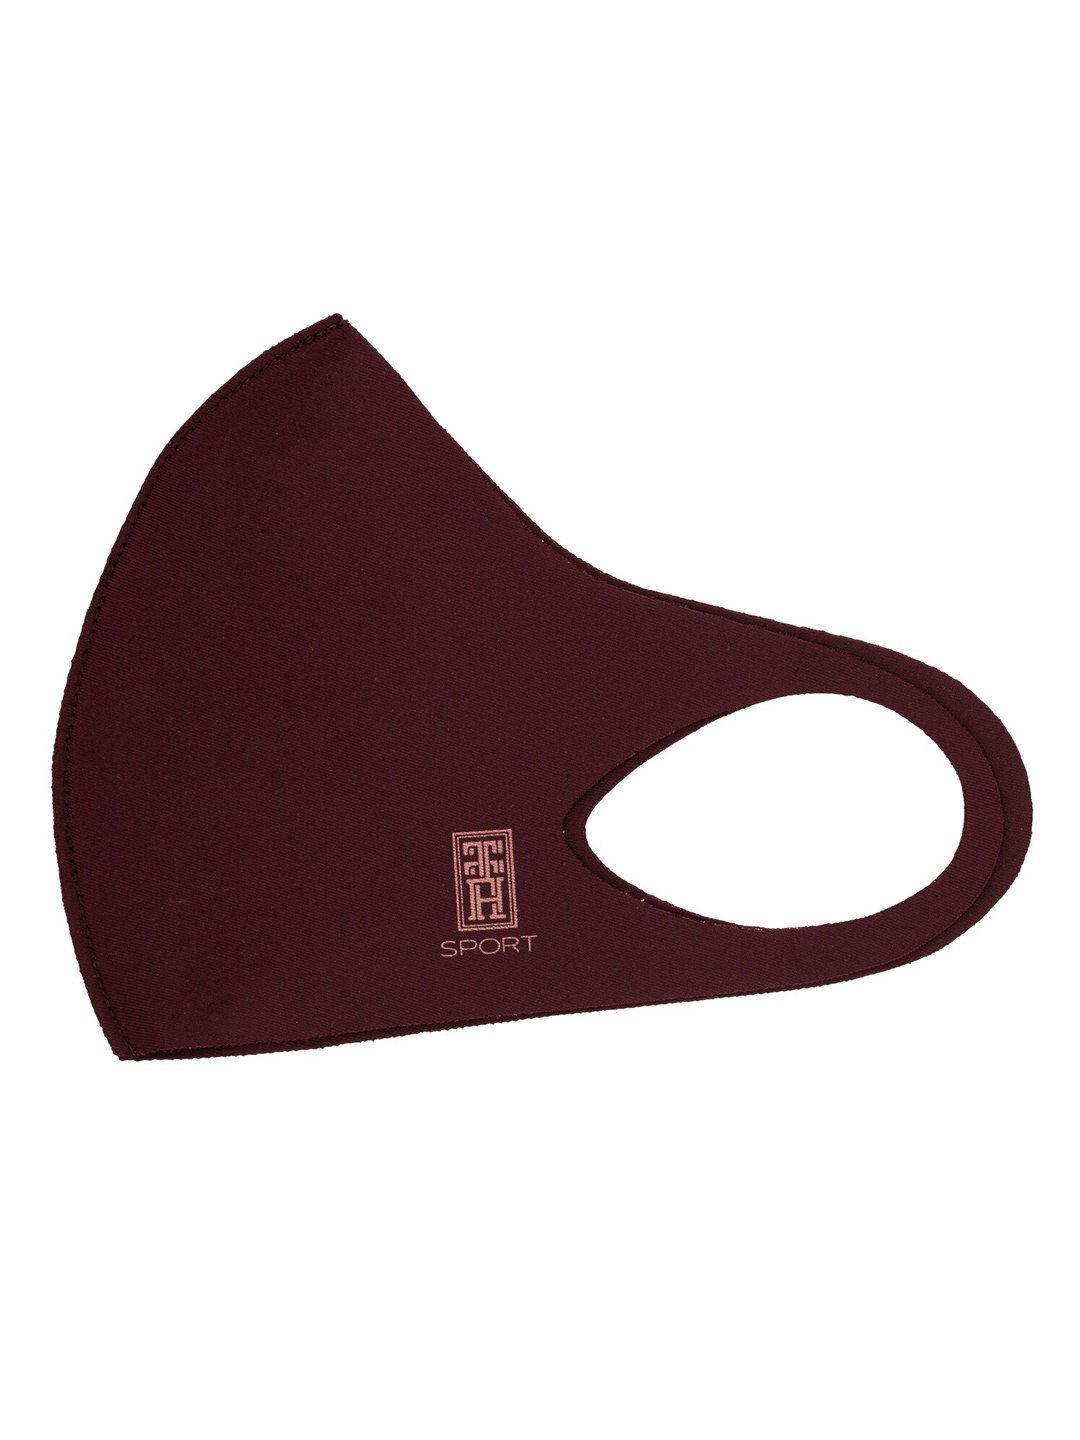 

The Tie Hub Unisex Maroon Solid Single Ply Reusable Sports Outdoor Cloth Mask